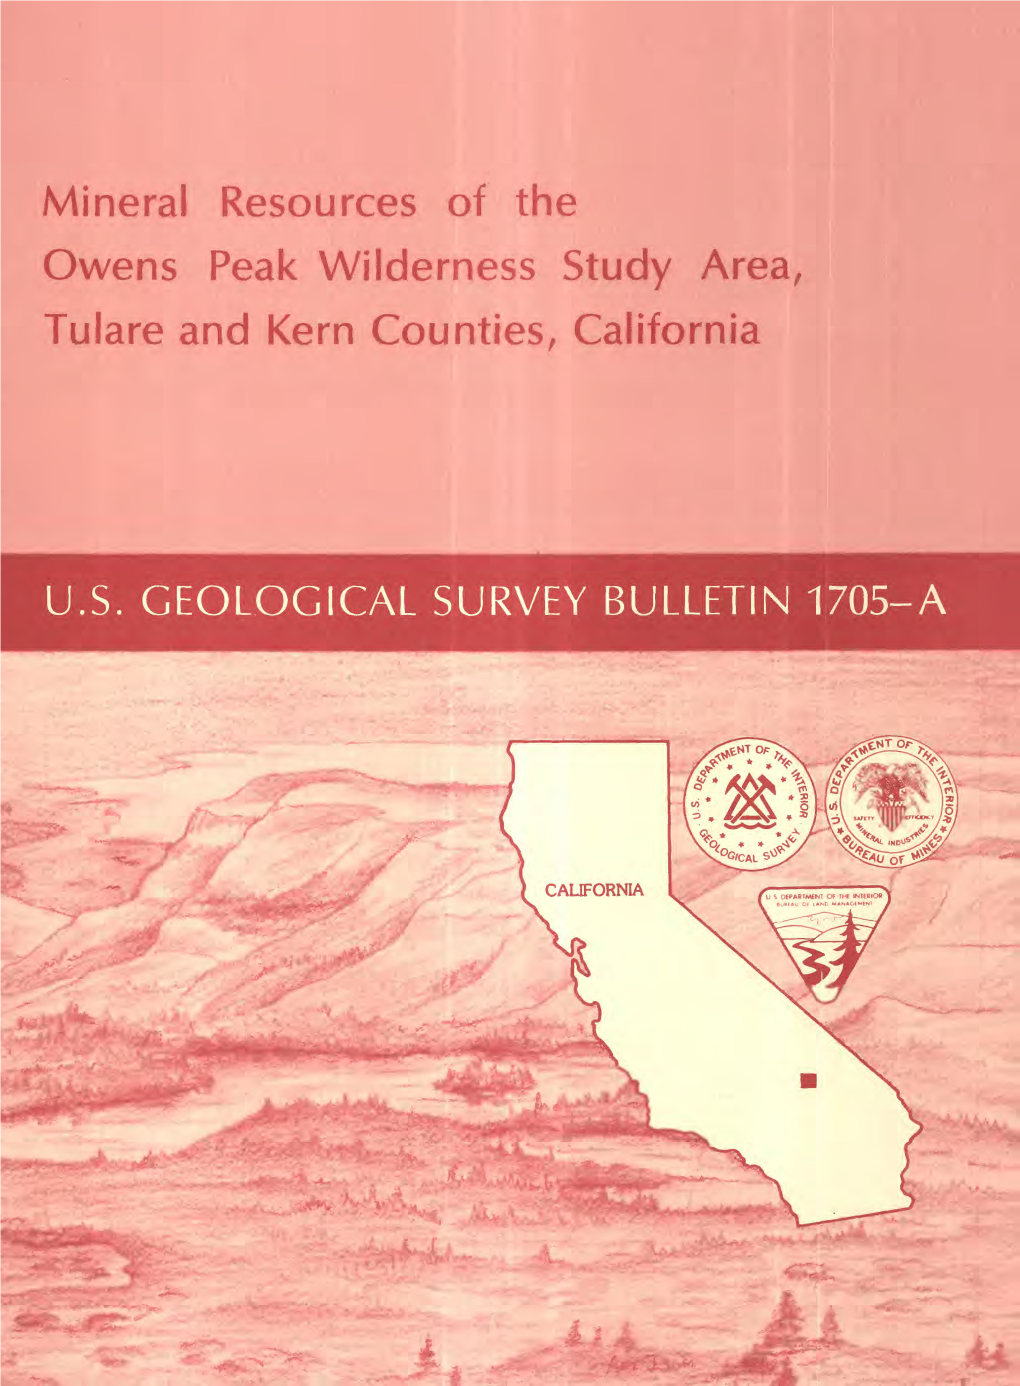 Mineral Resources of the Owens Peak Wilderness Study Area, Tulare and Kern Counties, California